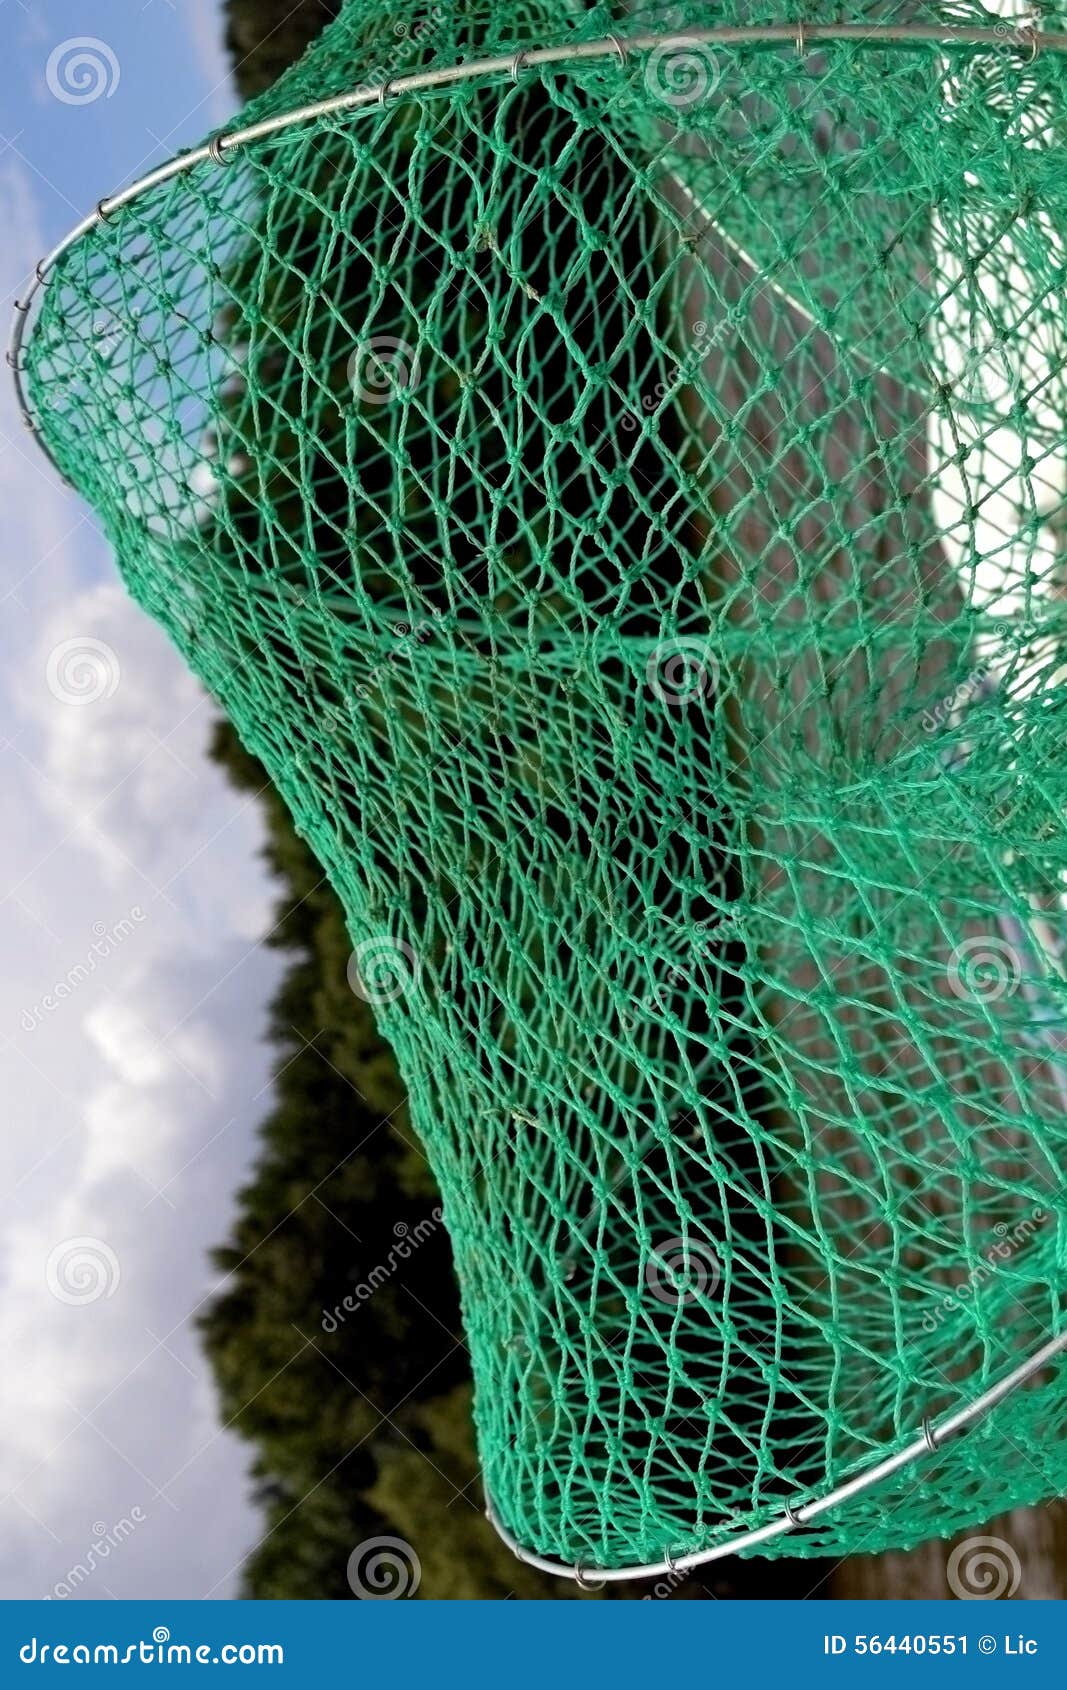 Green net for fish stock image. Image of post, shore - 56440551